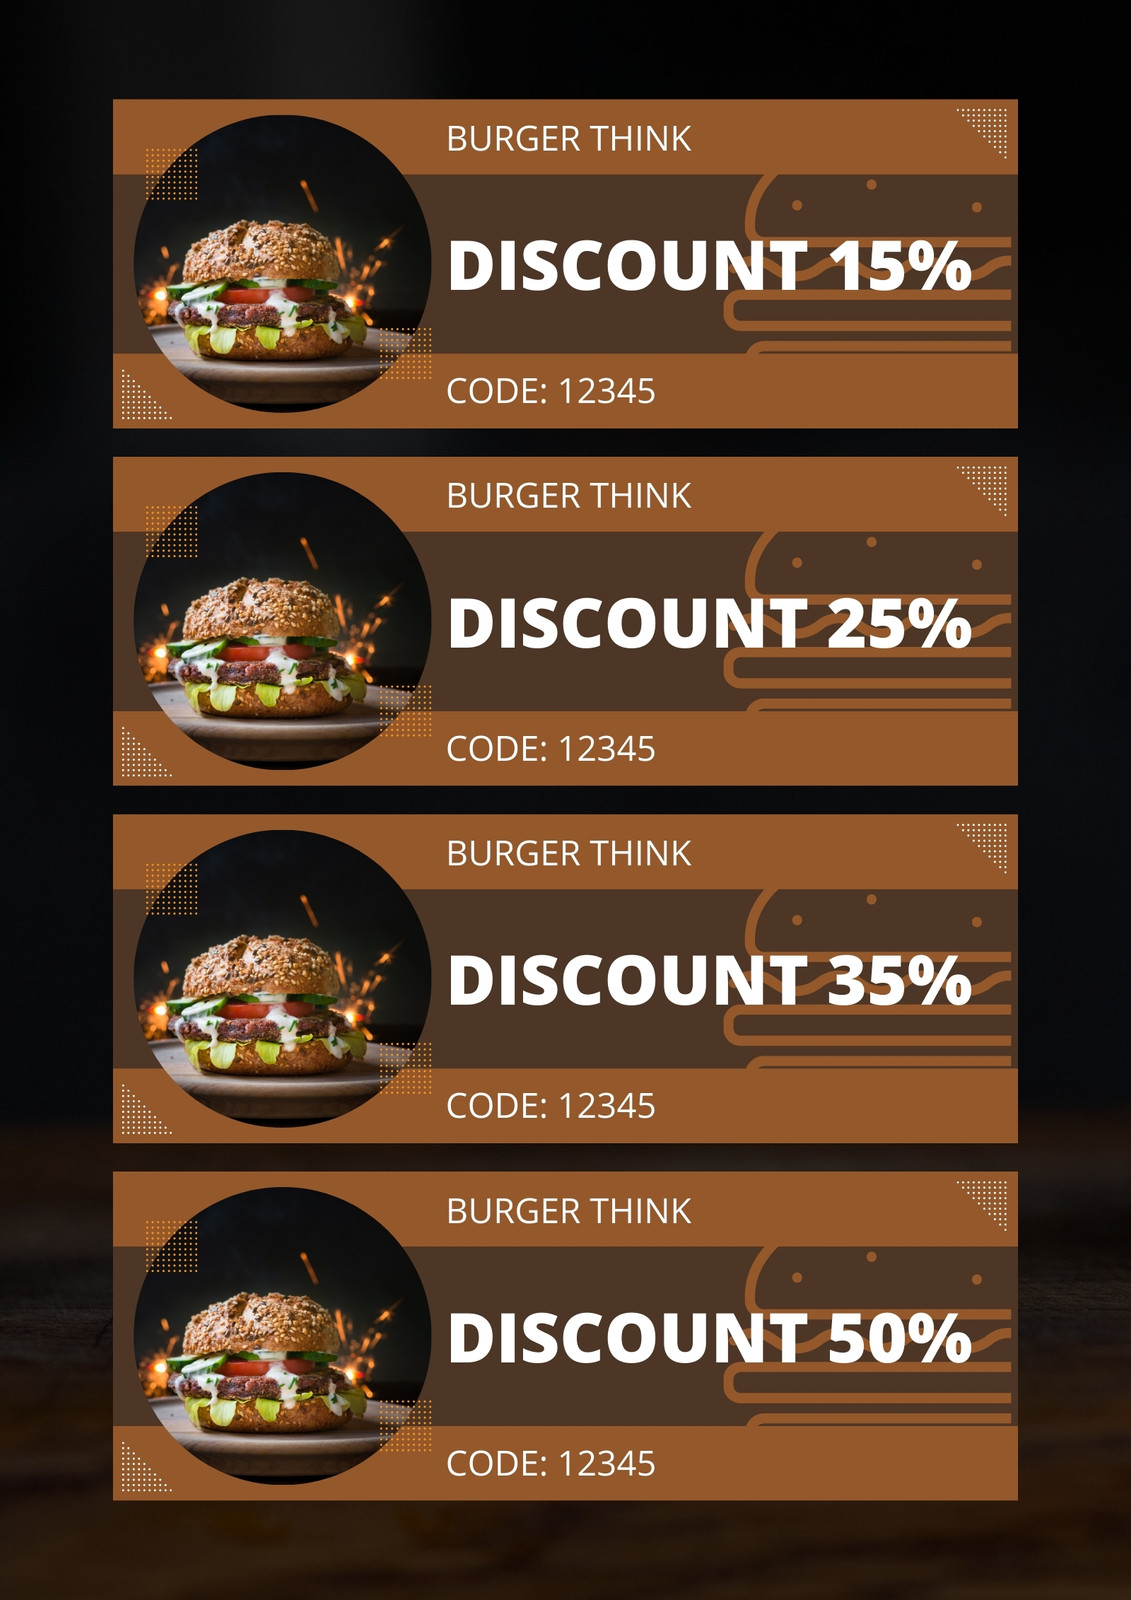 Discounted prices on restaurant coupons